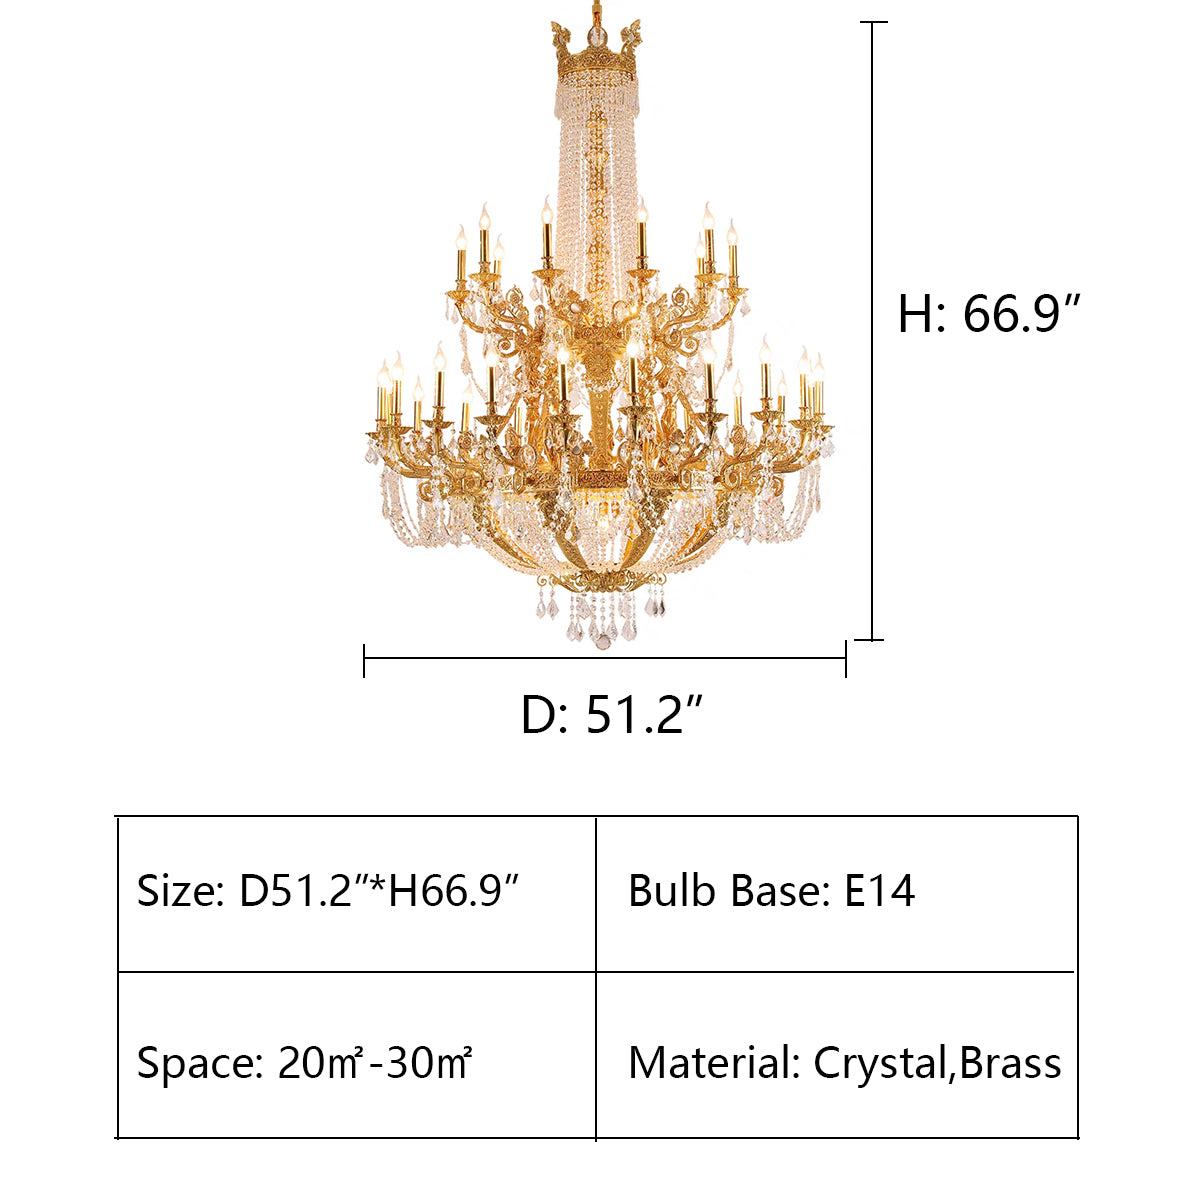 D51.2"*H66.9" chandelier,chandeliers,pendant,crystal,metal,clear crystal,candle,branch,round,raindrop,teardrop,extra large,oversized,large,huge,big,round,living room,luxury,dining room,modern,foyer,stairs,hallway,entrys,hotel lobby,duplex hall,loft,gold,brass,copper